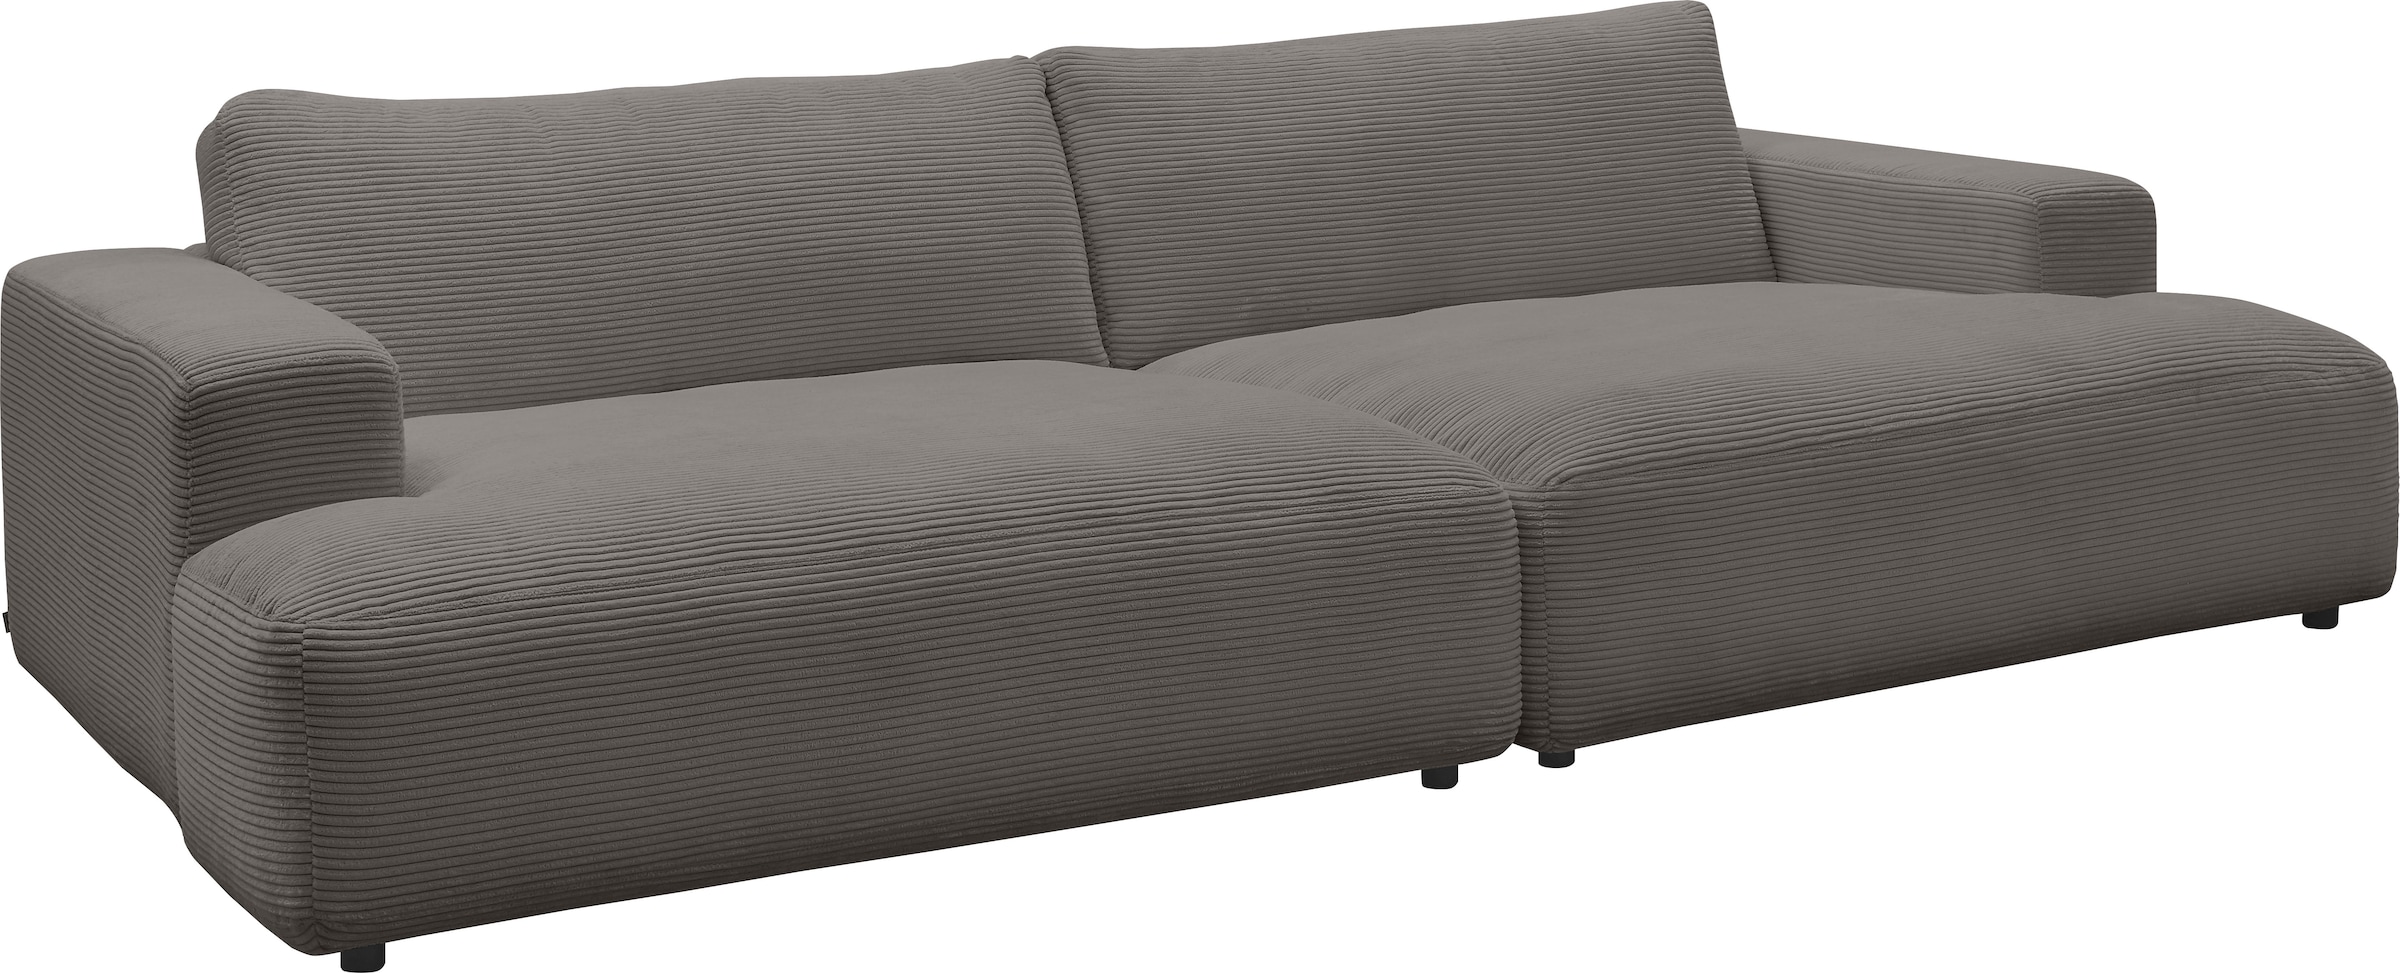 GALLERY M branded by Musterring Cord-Bezug, cm Online Shop OTTO Loungesofa »Lucia«, Breite 292